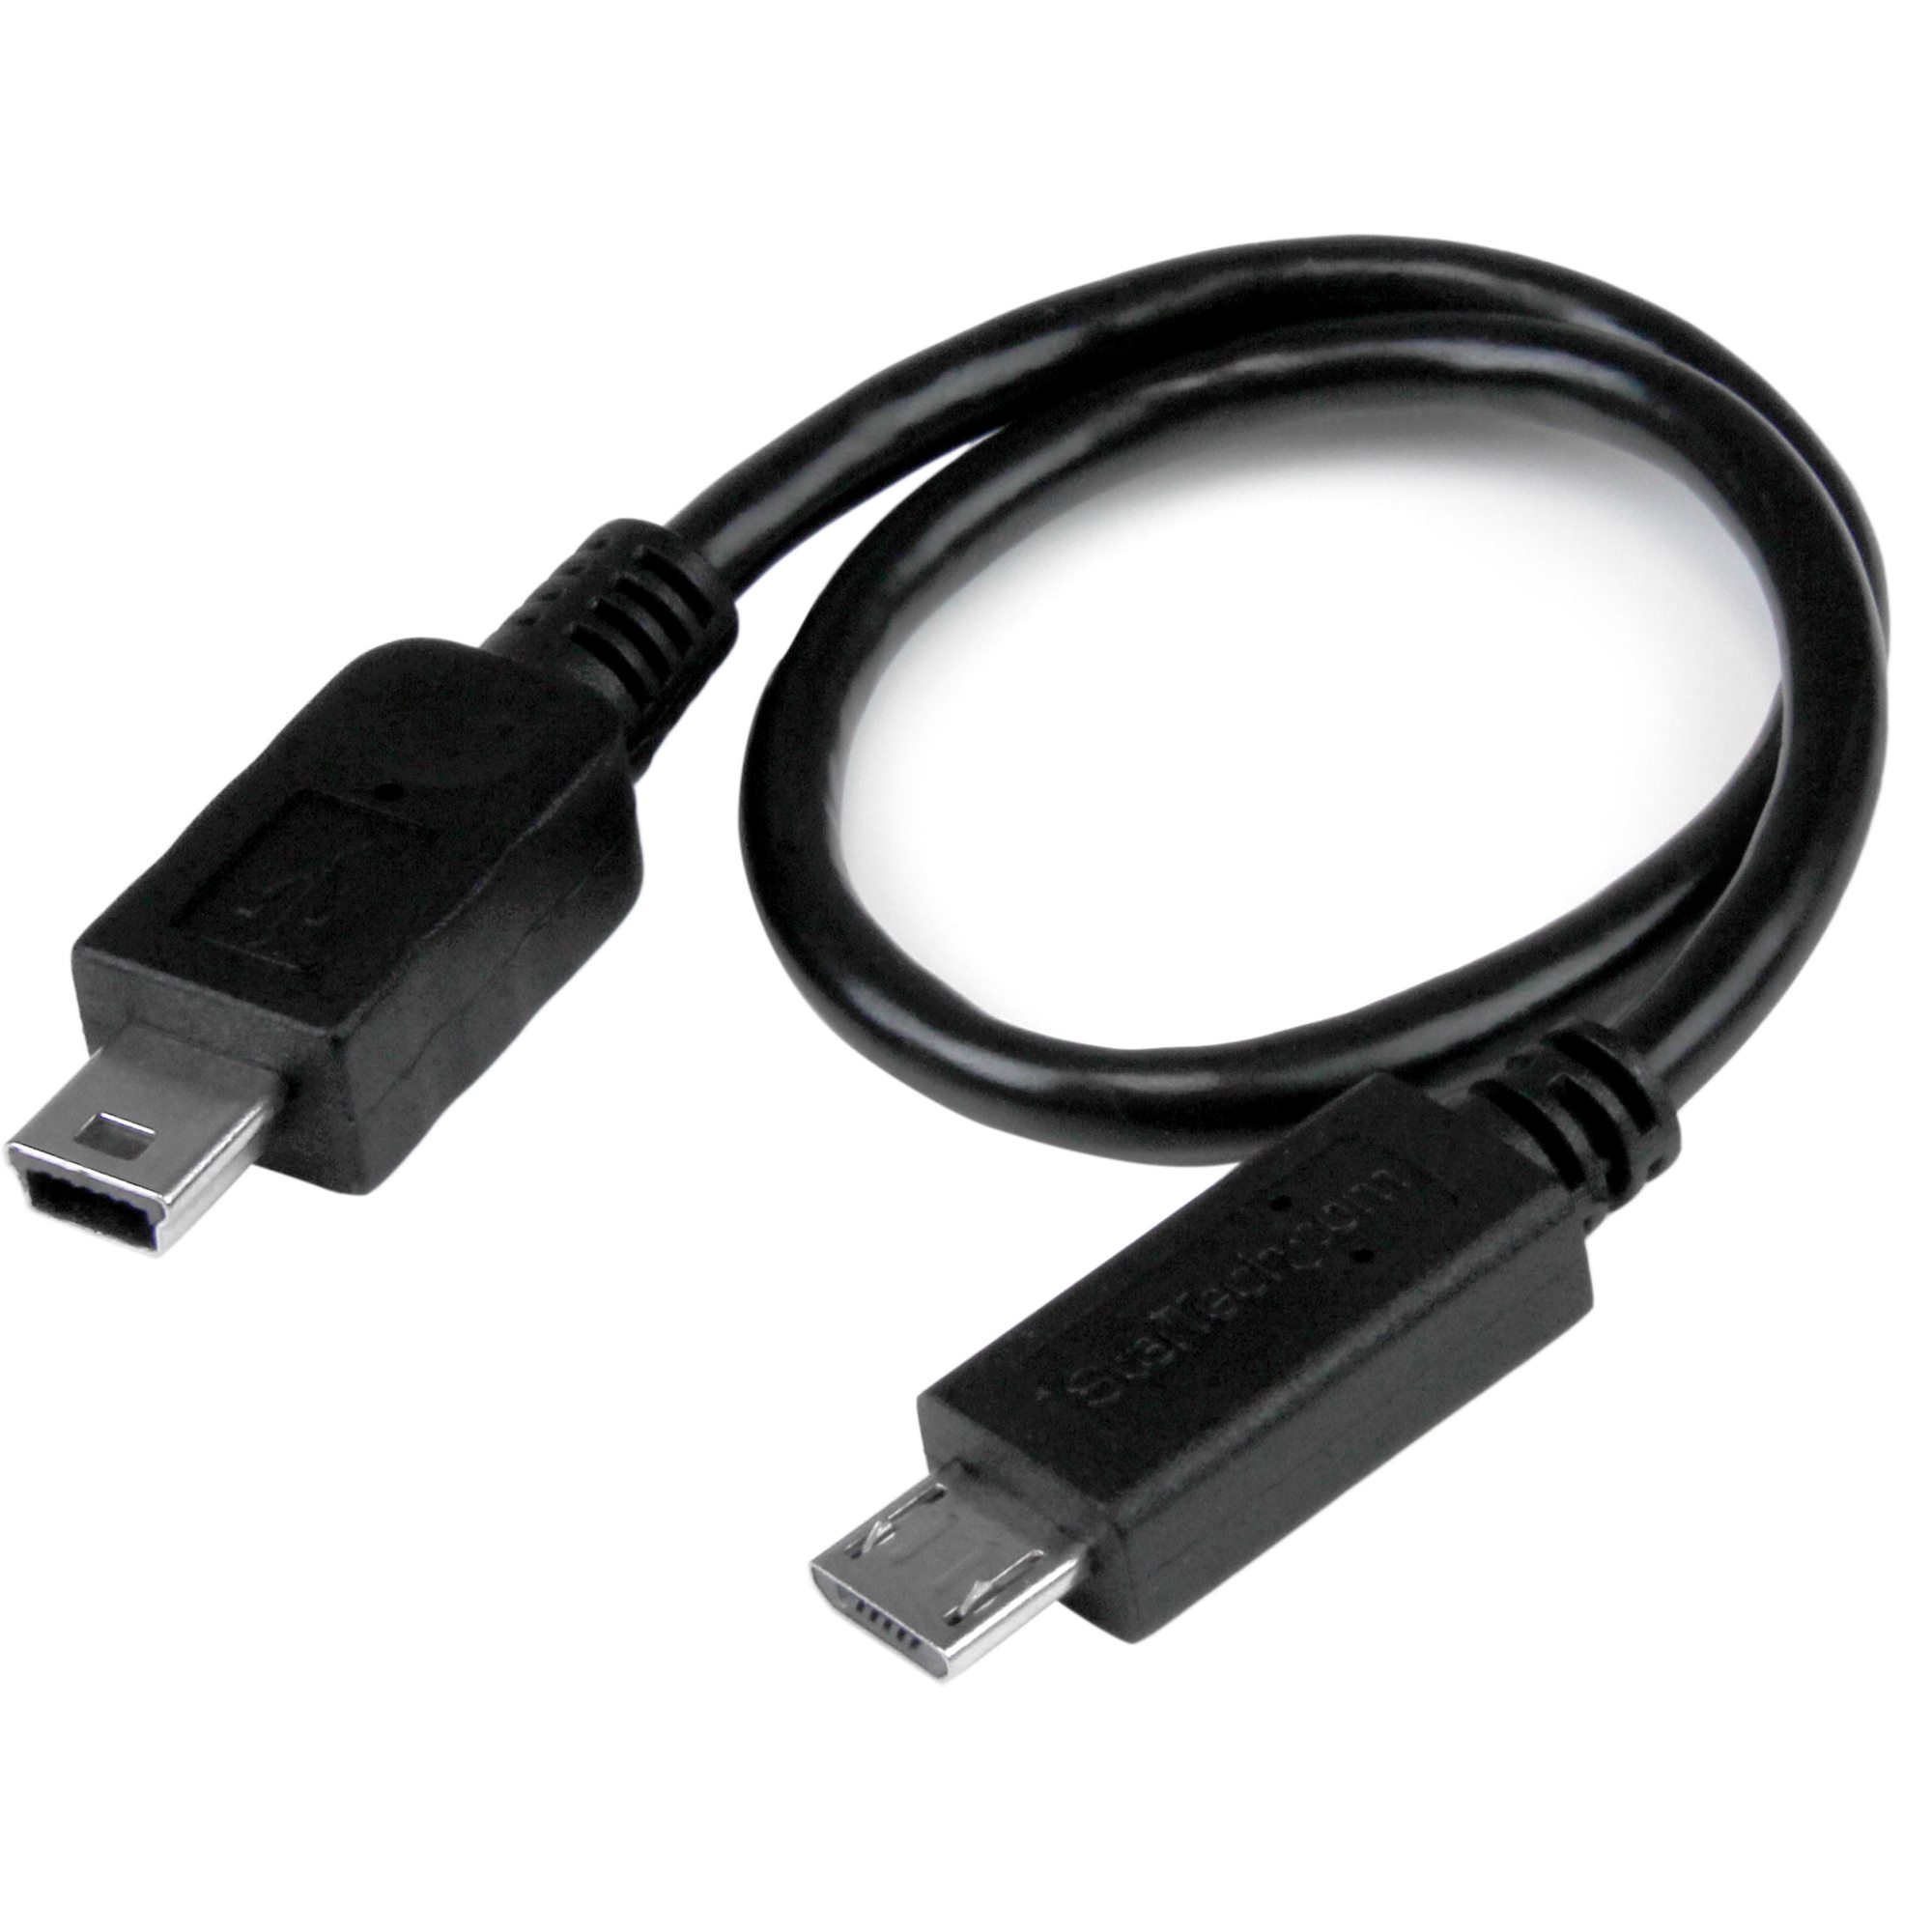 USB OTG Cable - Micro USB to Mini USB - M/M - 8 in. - BCI Imaging